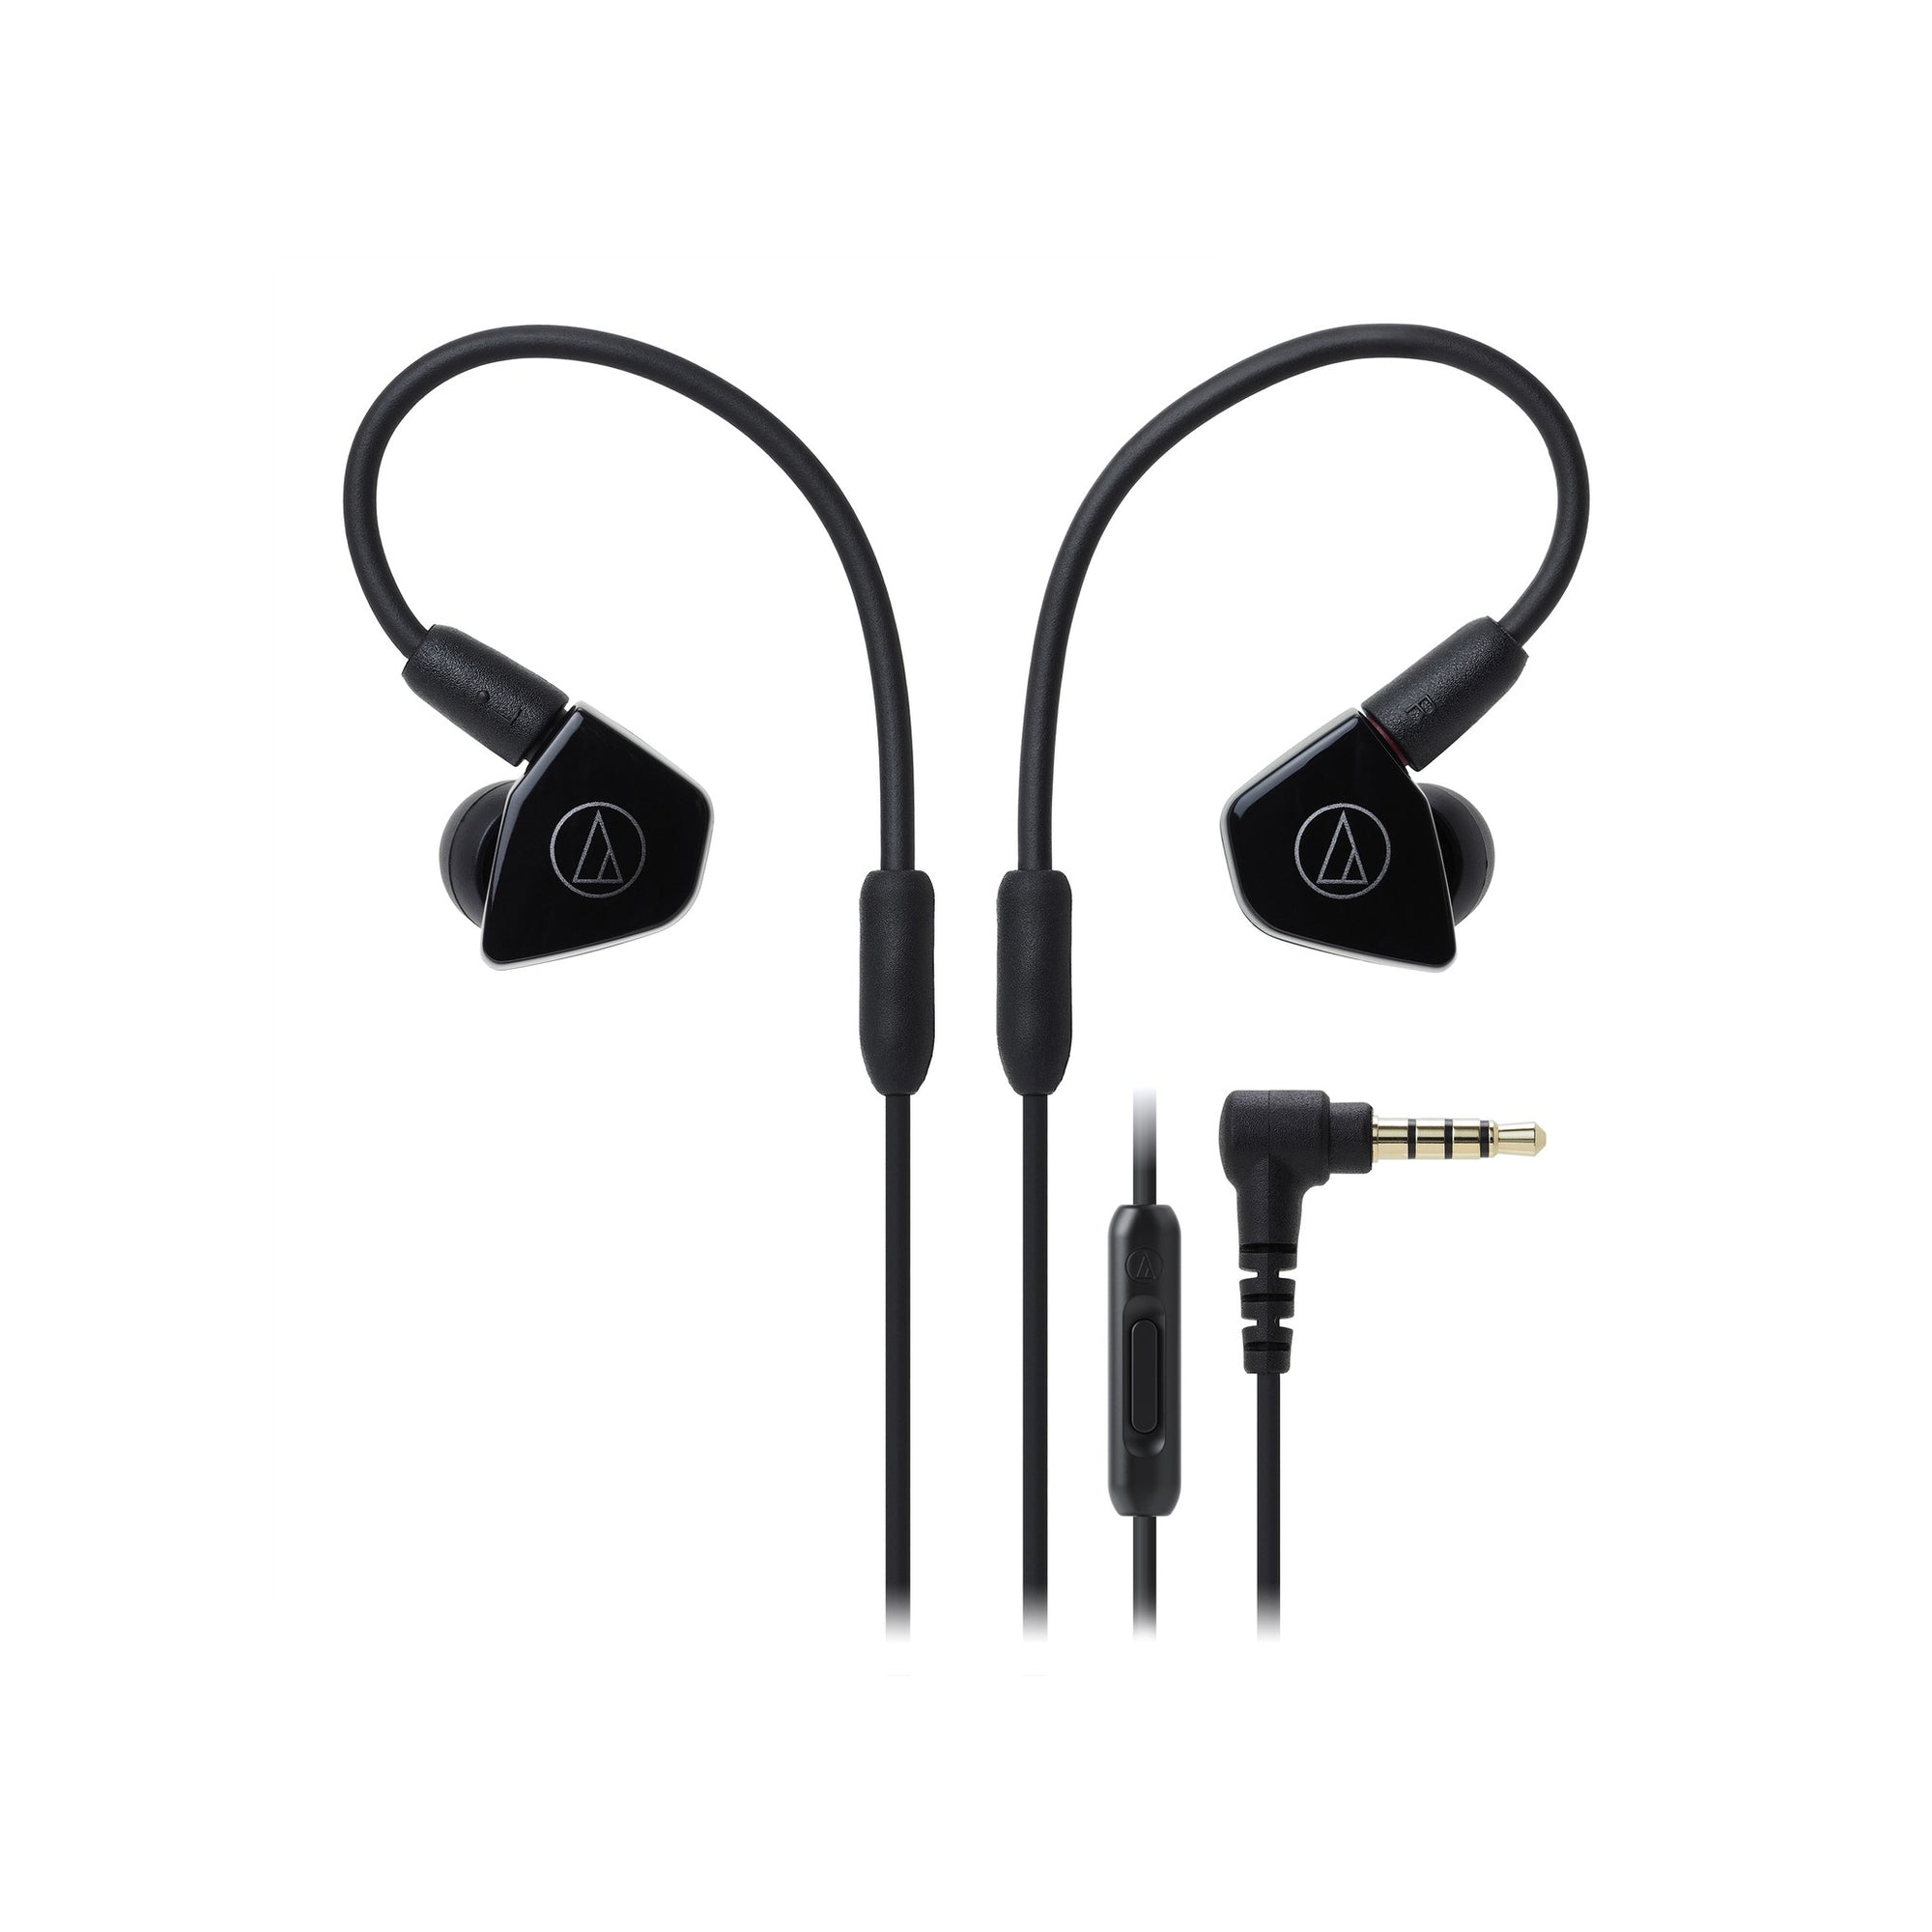 Audio-Technica ATH-LS50iS In-Ear Headphones IEMs with In-line Mic & Control